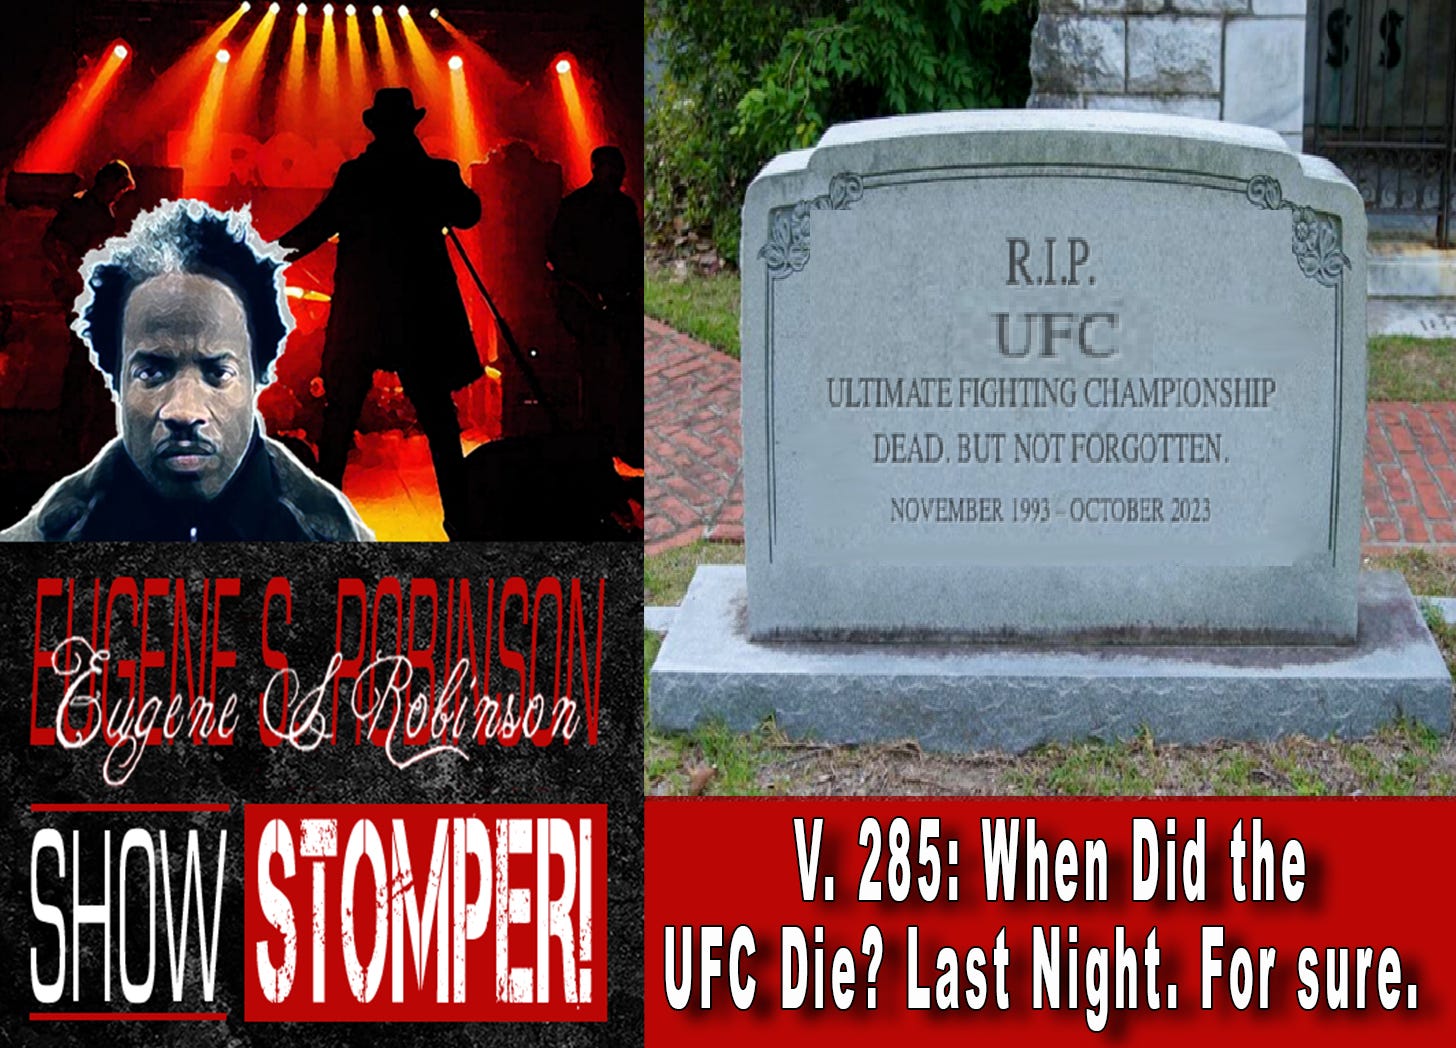 V. 285: When Did the UFC Die? Last Night. For sure. On The Eugene S. Robinson Show Stomper! From NY!